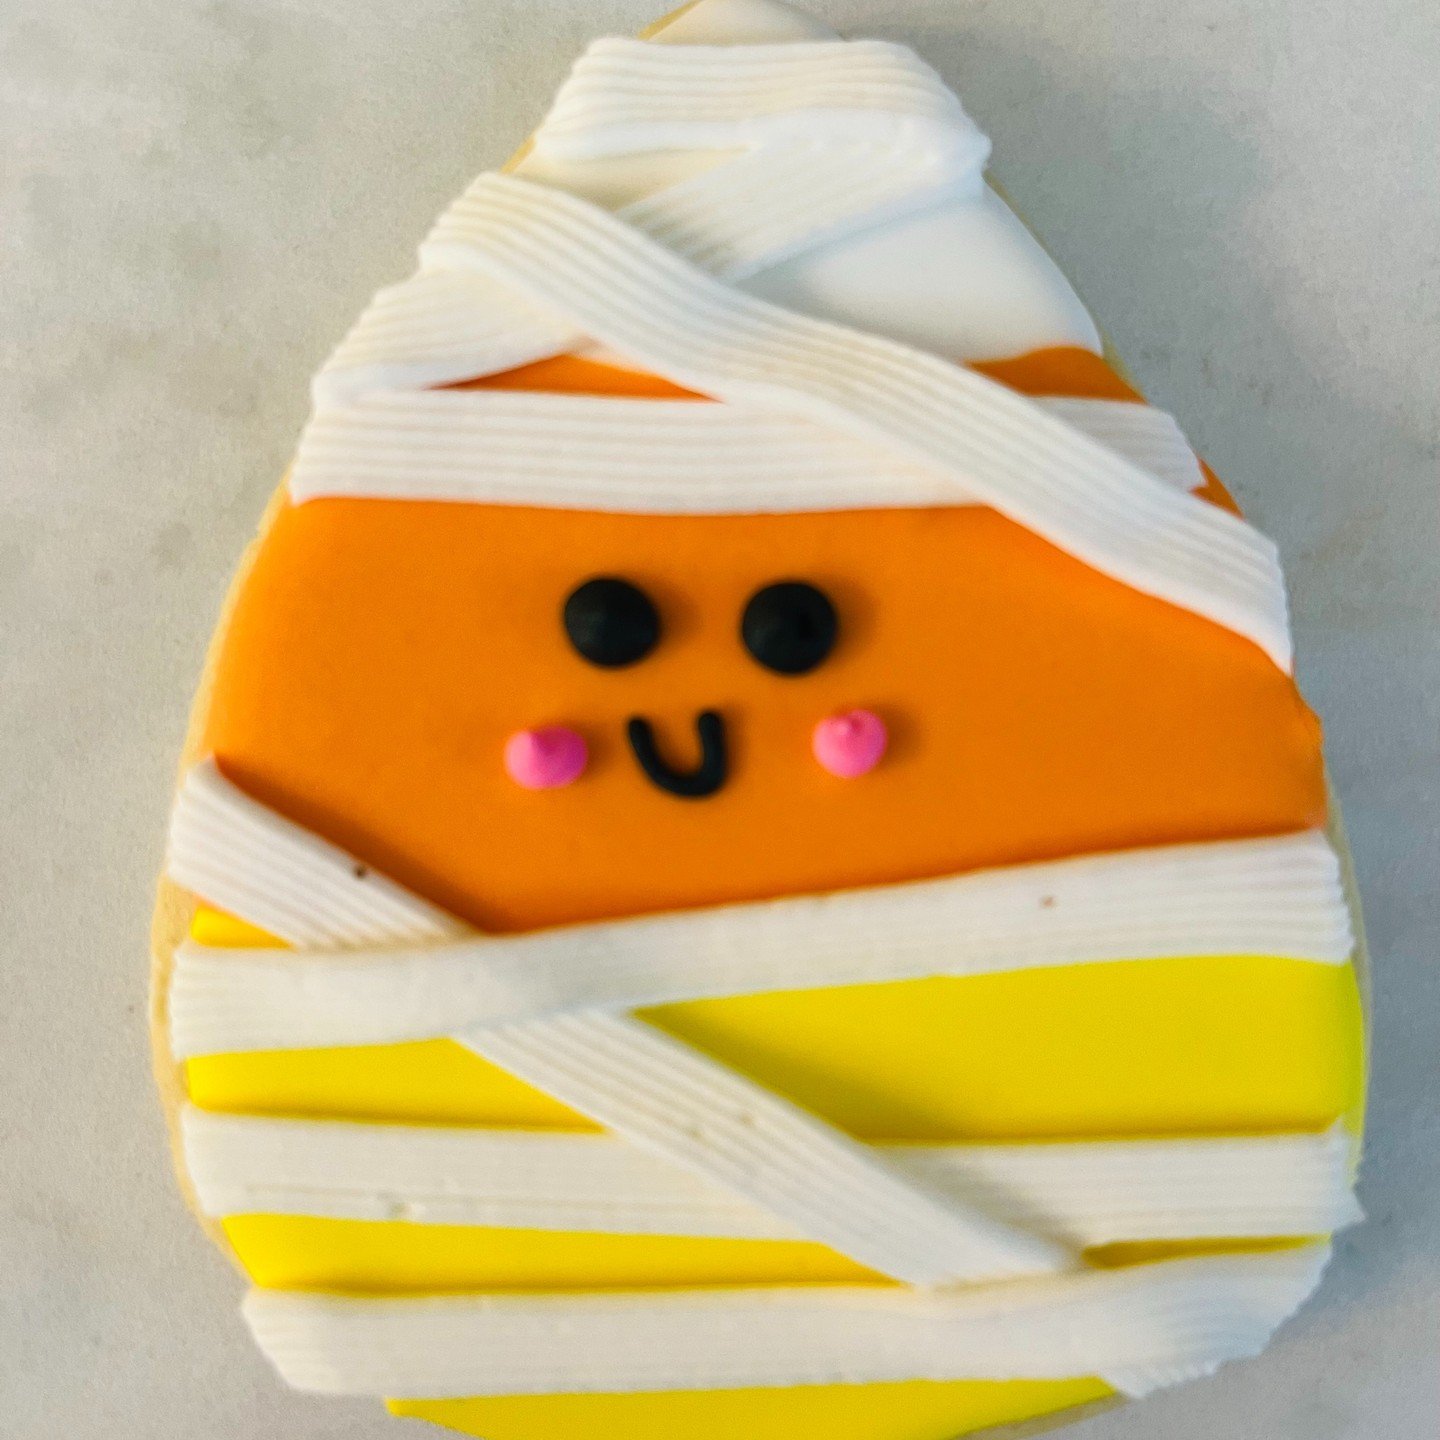 Candy Corn Mummies are here!